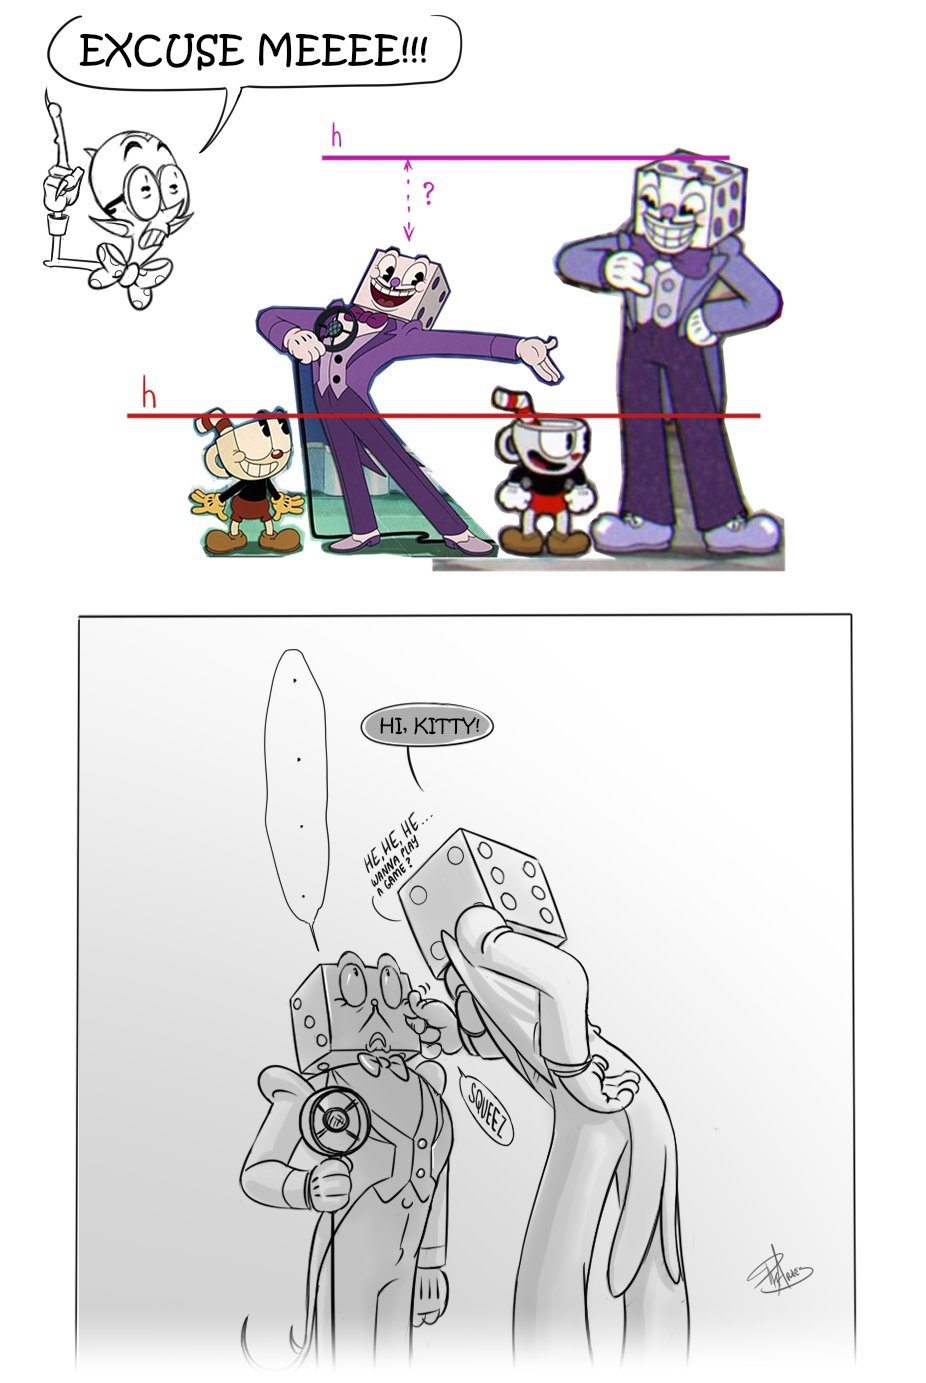 PaprikAries on X: _The Showman and the Gangster_ Fanart: King Dice/Mr. King  Dice (cuphead franchise) #RENEWTHECUPHEADSHOW #kingdice #mrkingdice  #TheCupheadShow #CupHead #cupheadfanart #cupheaddevil   / X